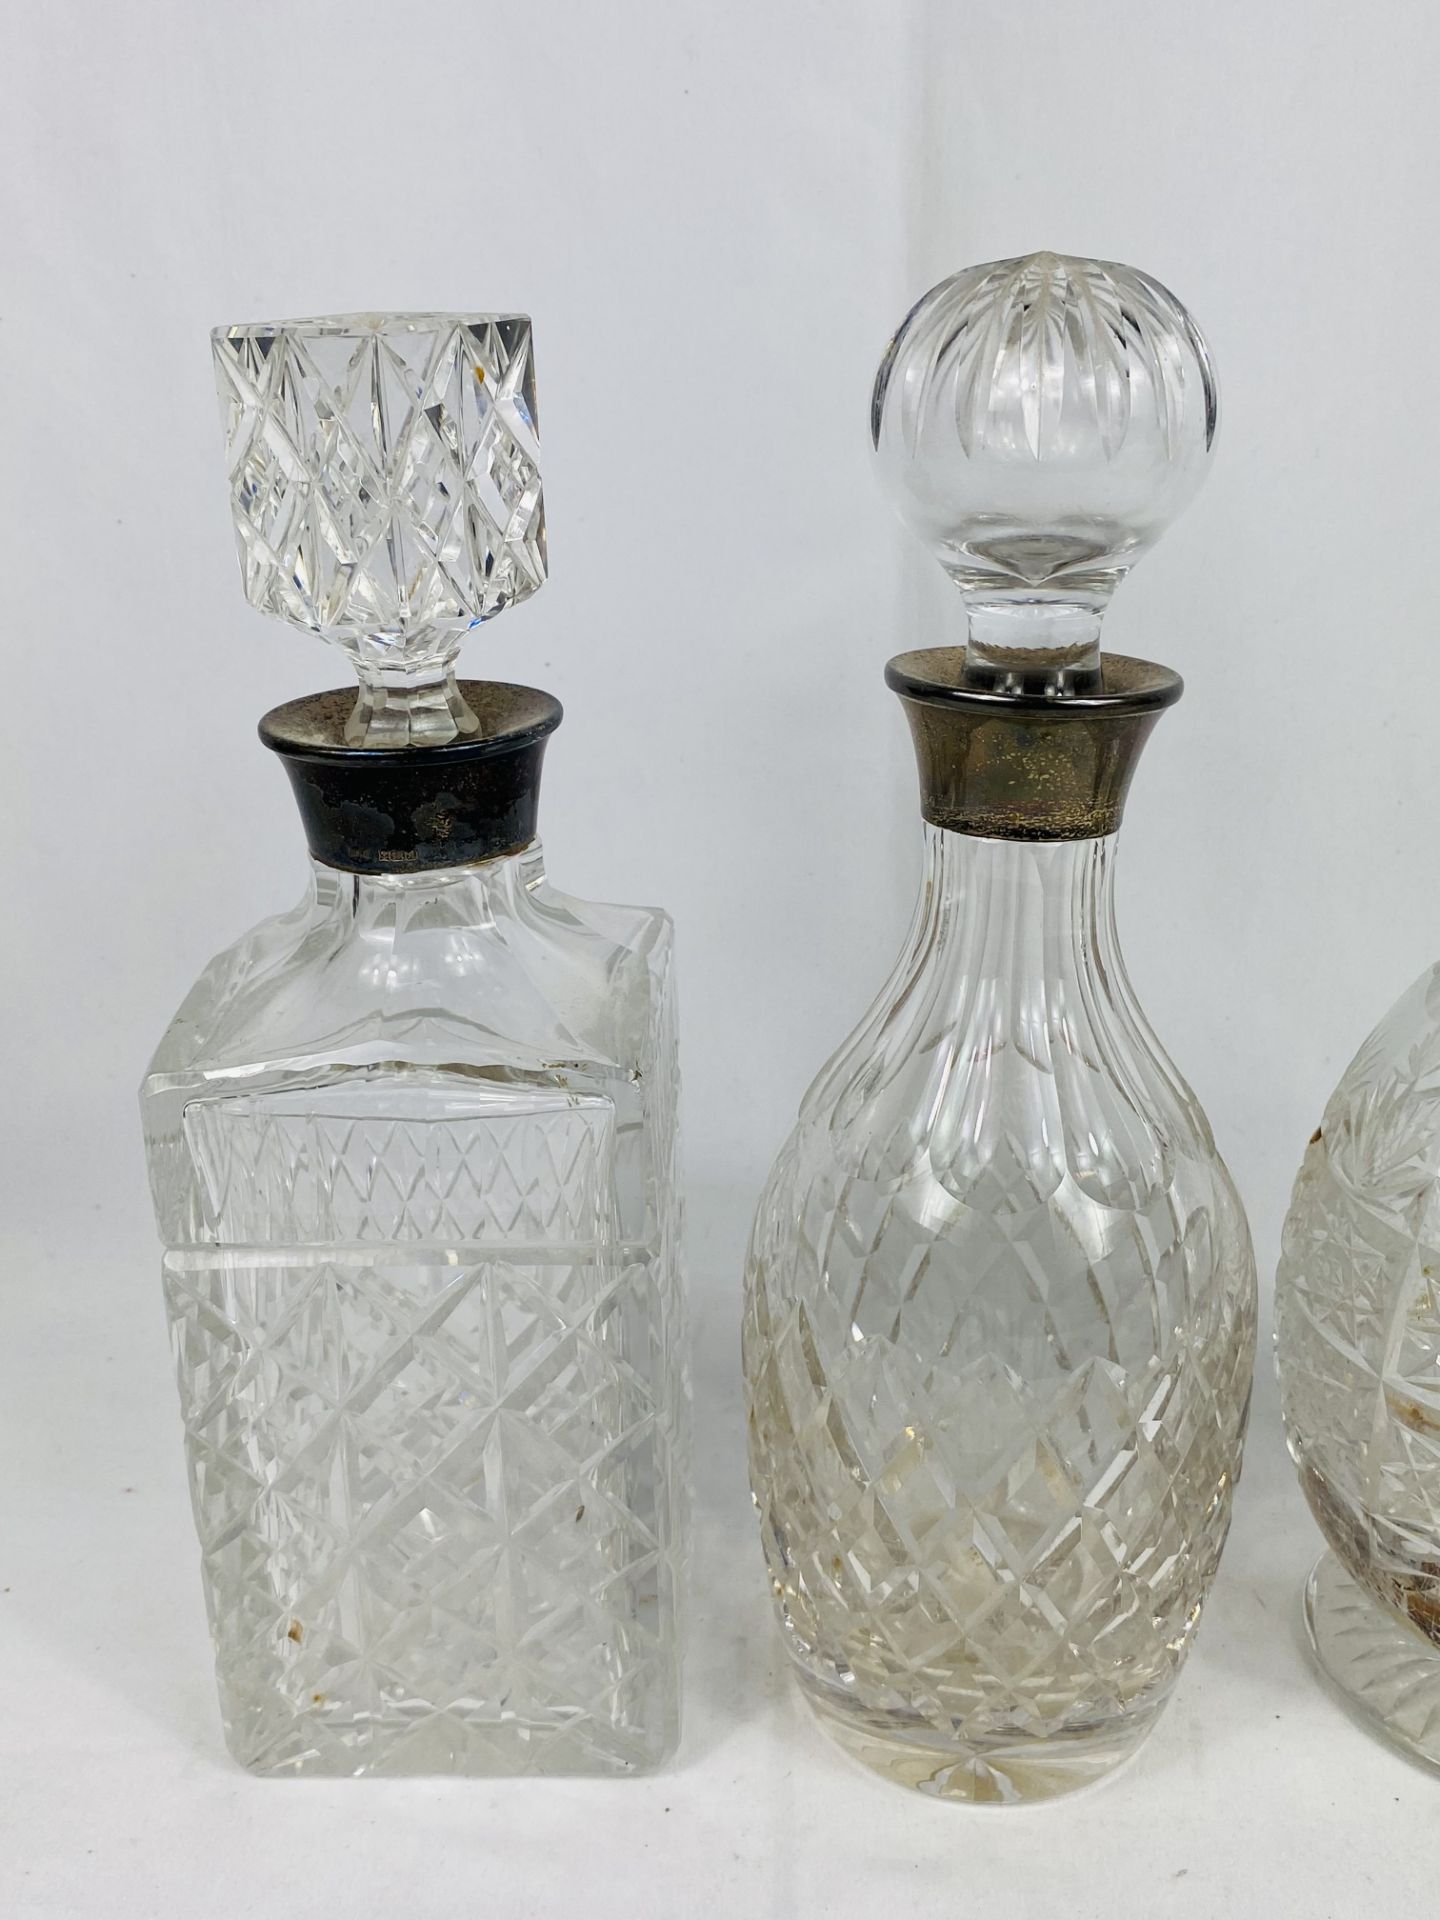 Two cut glass decanters with silver collars and a cut glass decanter - Image 3 of 3